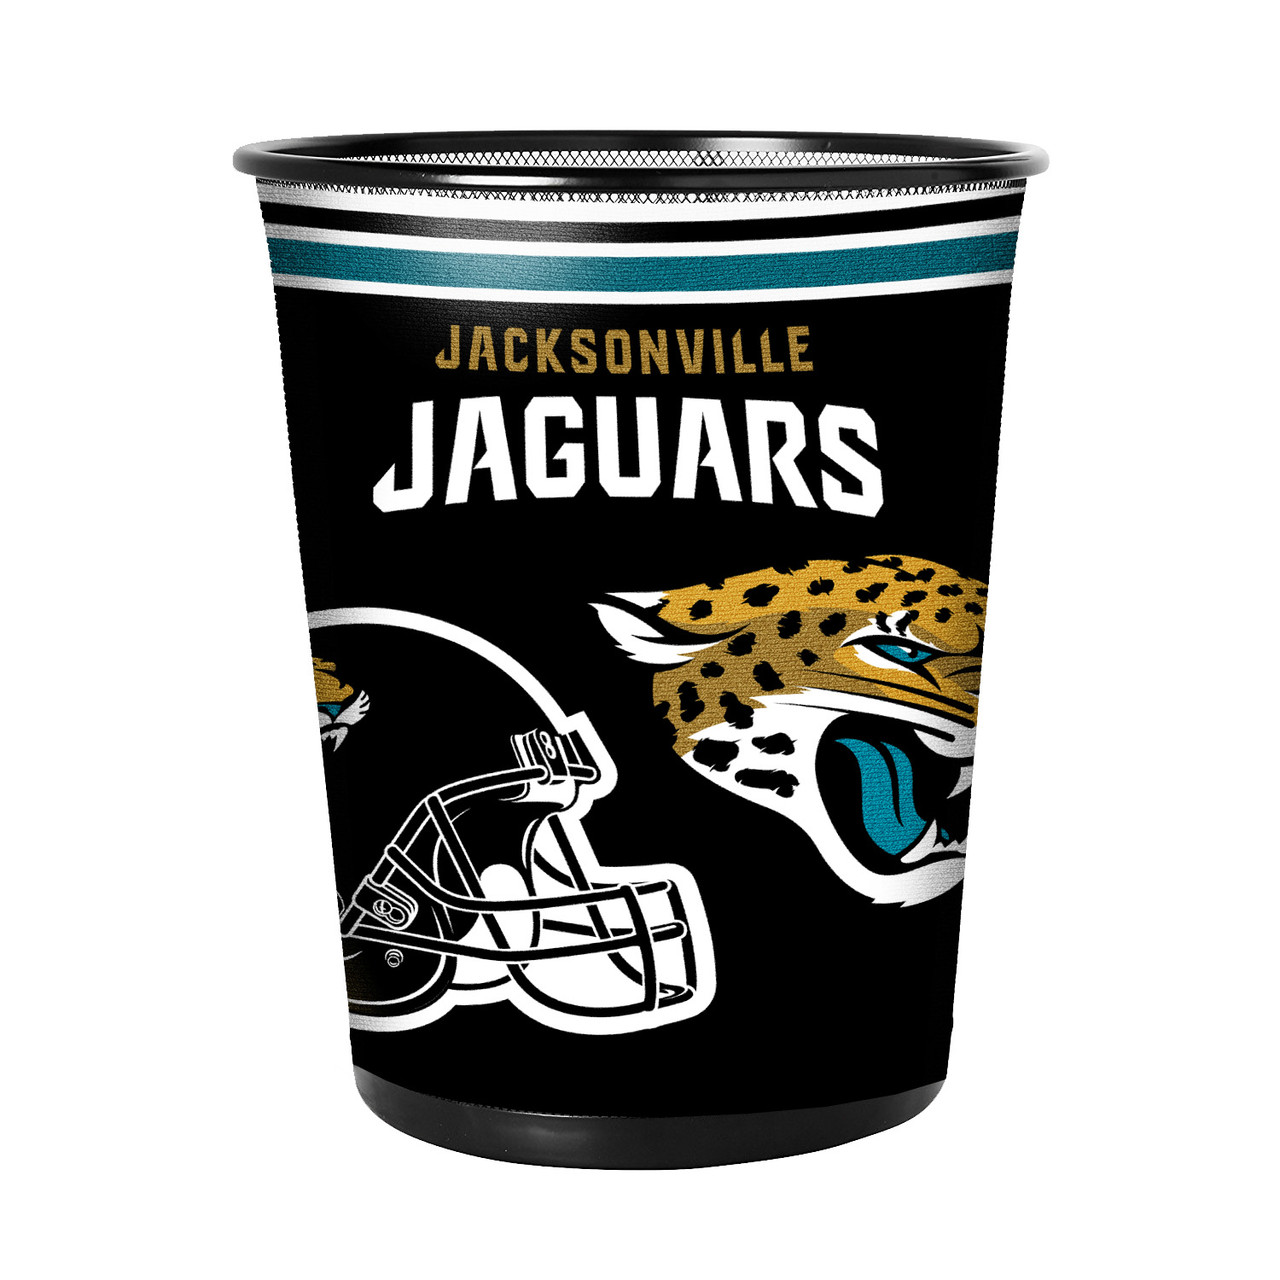 Jacksonville Jaguars Propane Tank Cover-5 Gallon Water Cooler Cover-Garbage Can Cover